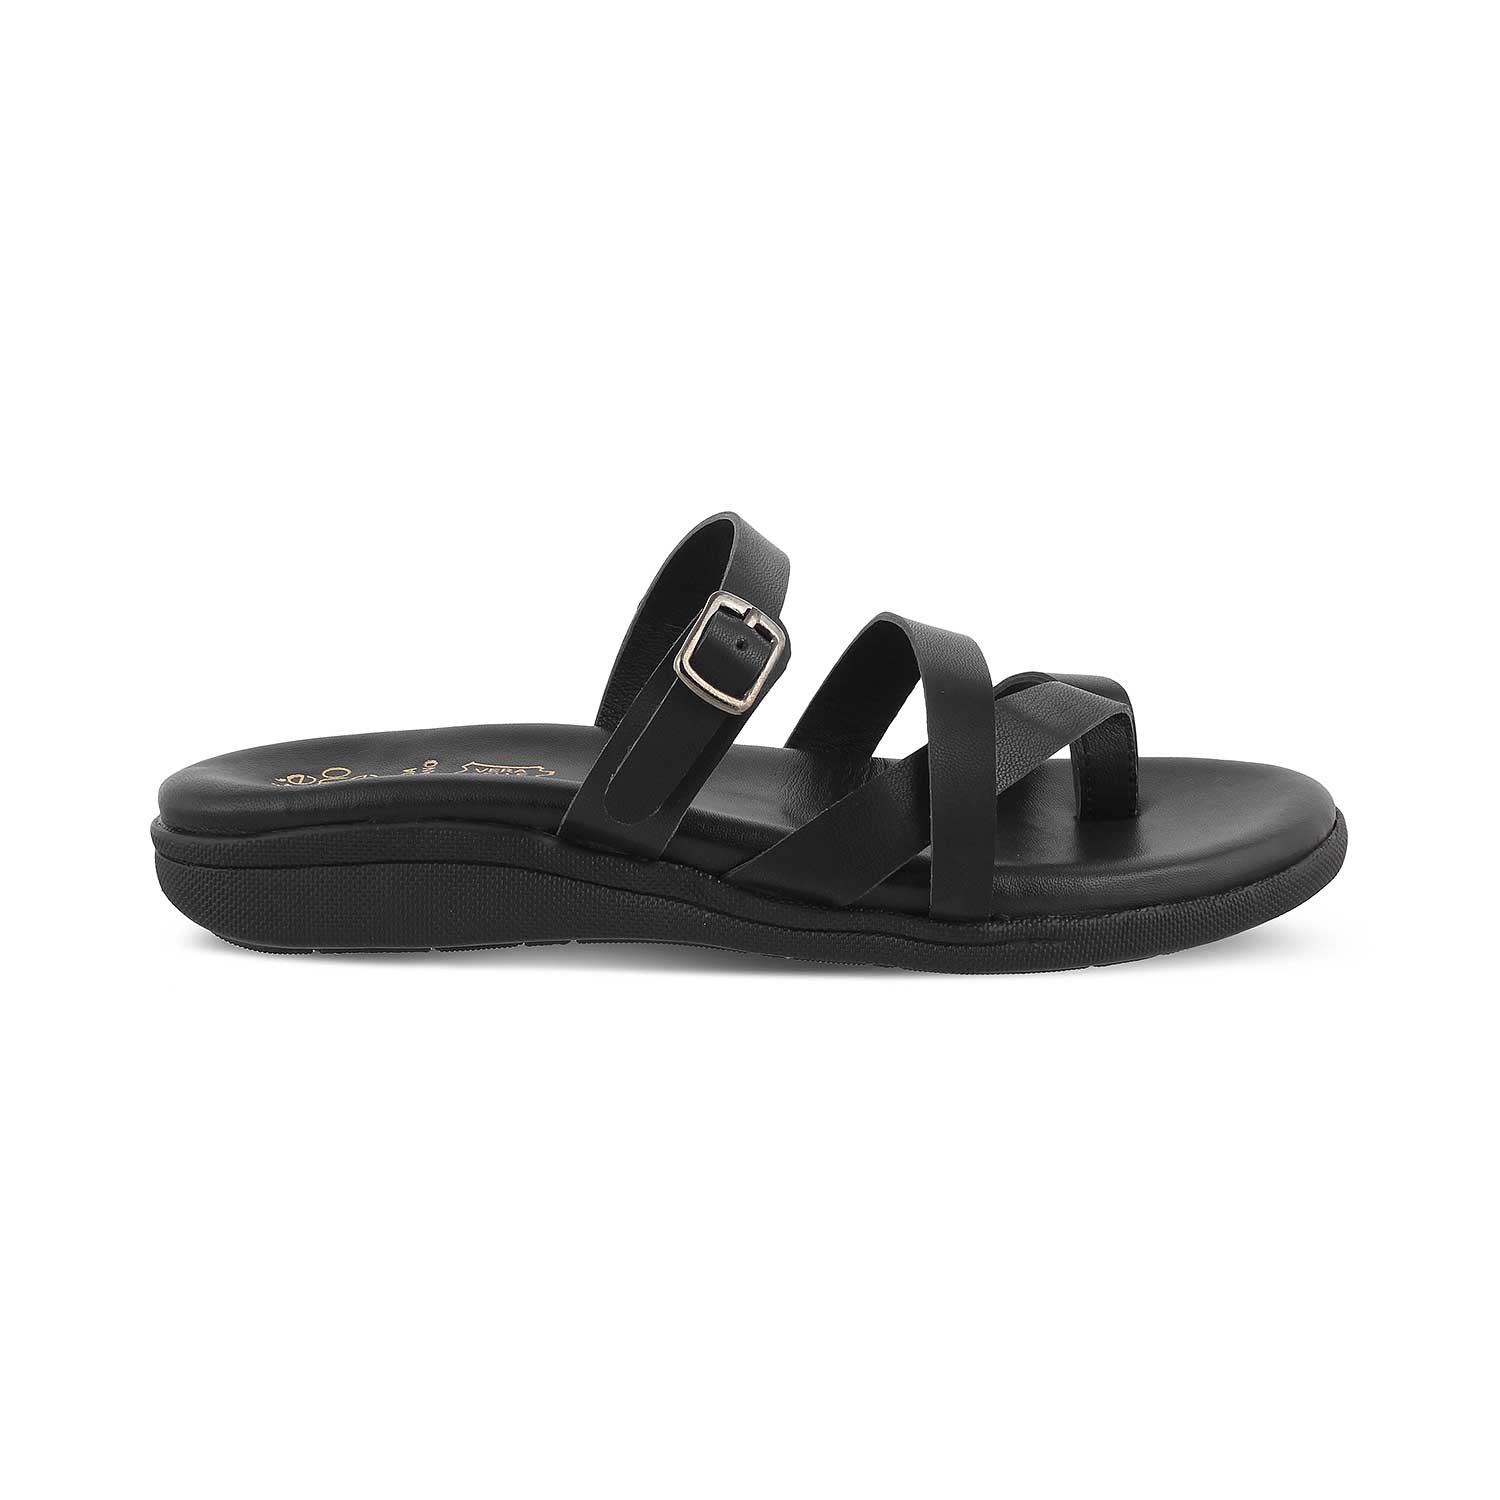 The Mos Black Women's Casual Flats Tresmode - Tresmode